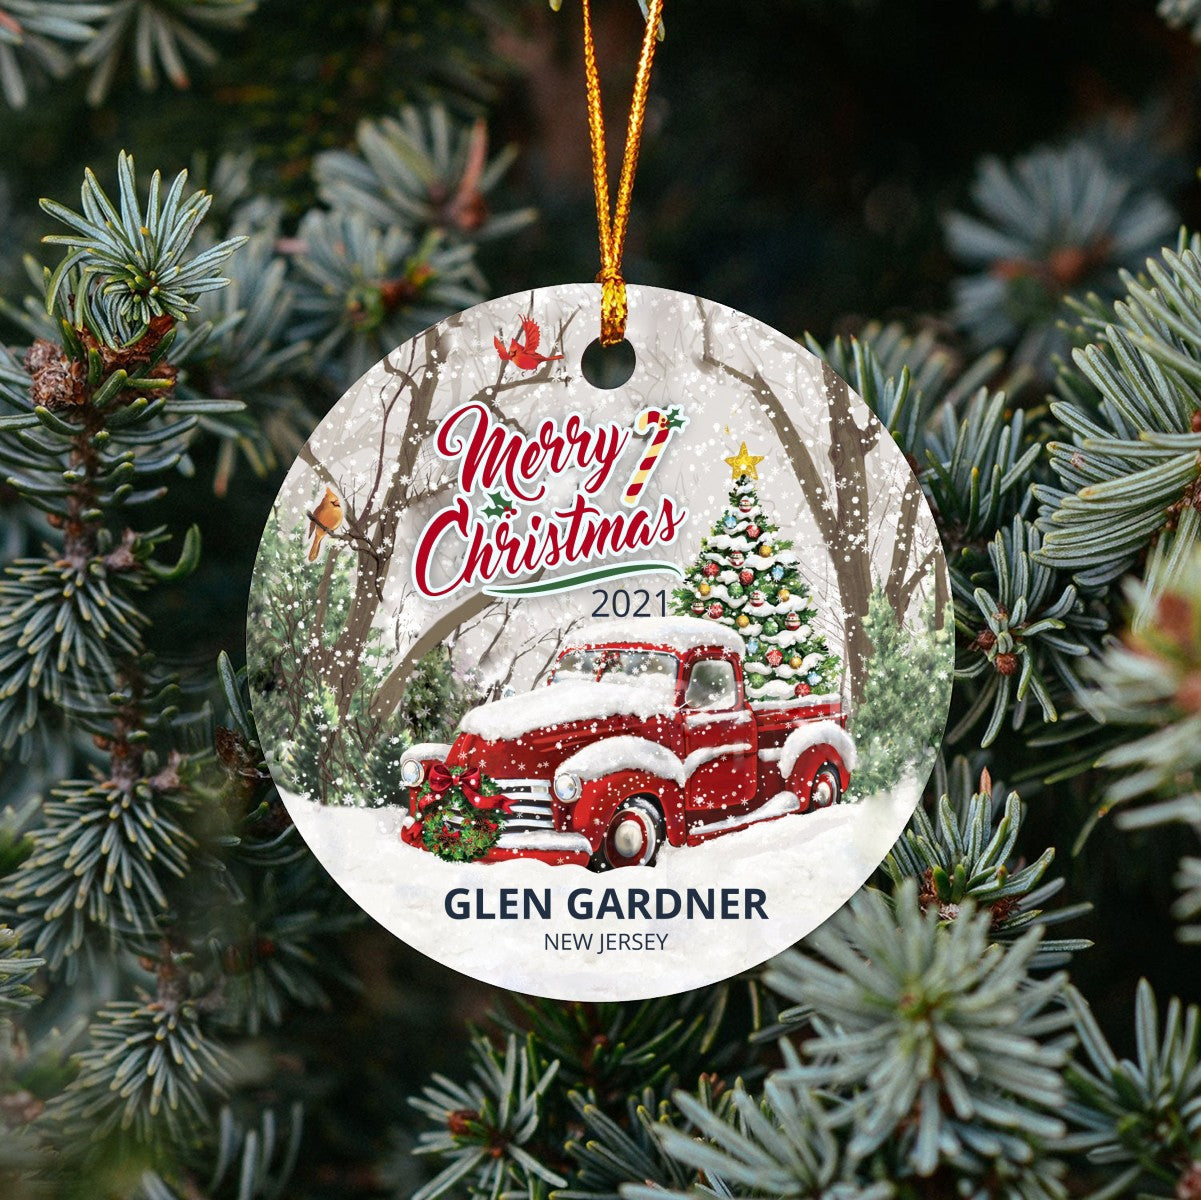 Christmas Tree Ornaments Glen Gardner - Ornament With Name City, State Glen Gardner New Jersey NJ Ornament - Red Truck Xmas Ornaments 3'' Plastic Gift For Family, Friend And Housewarming